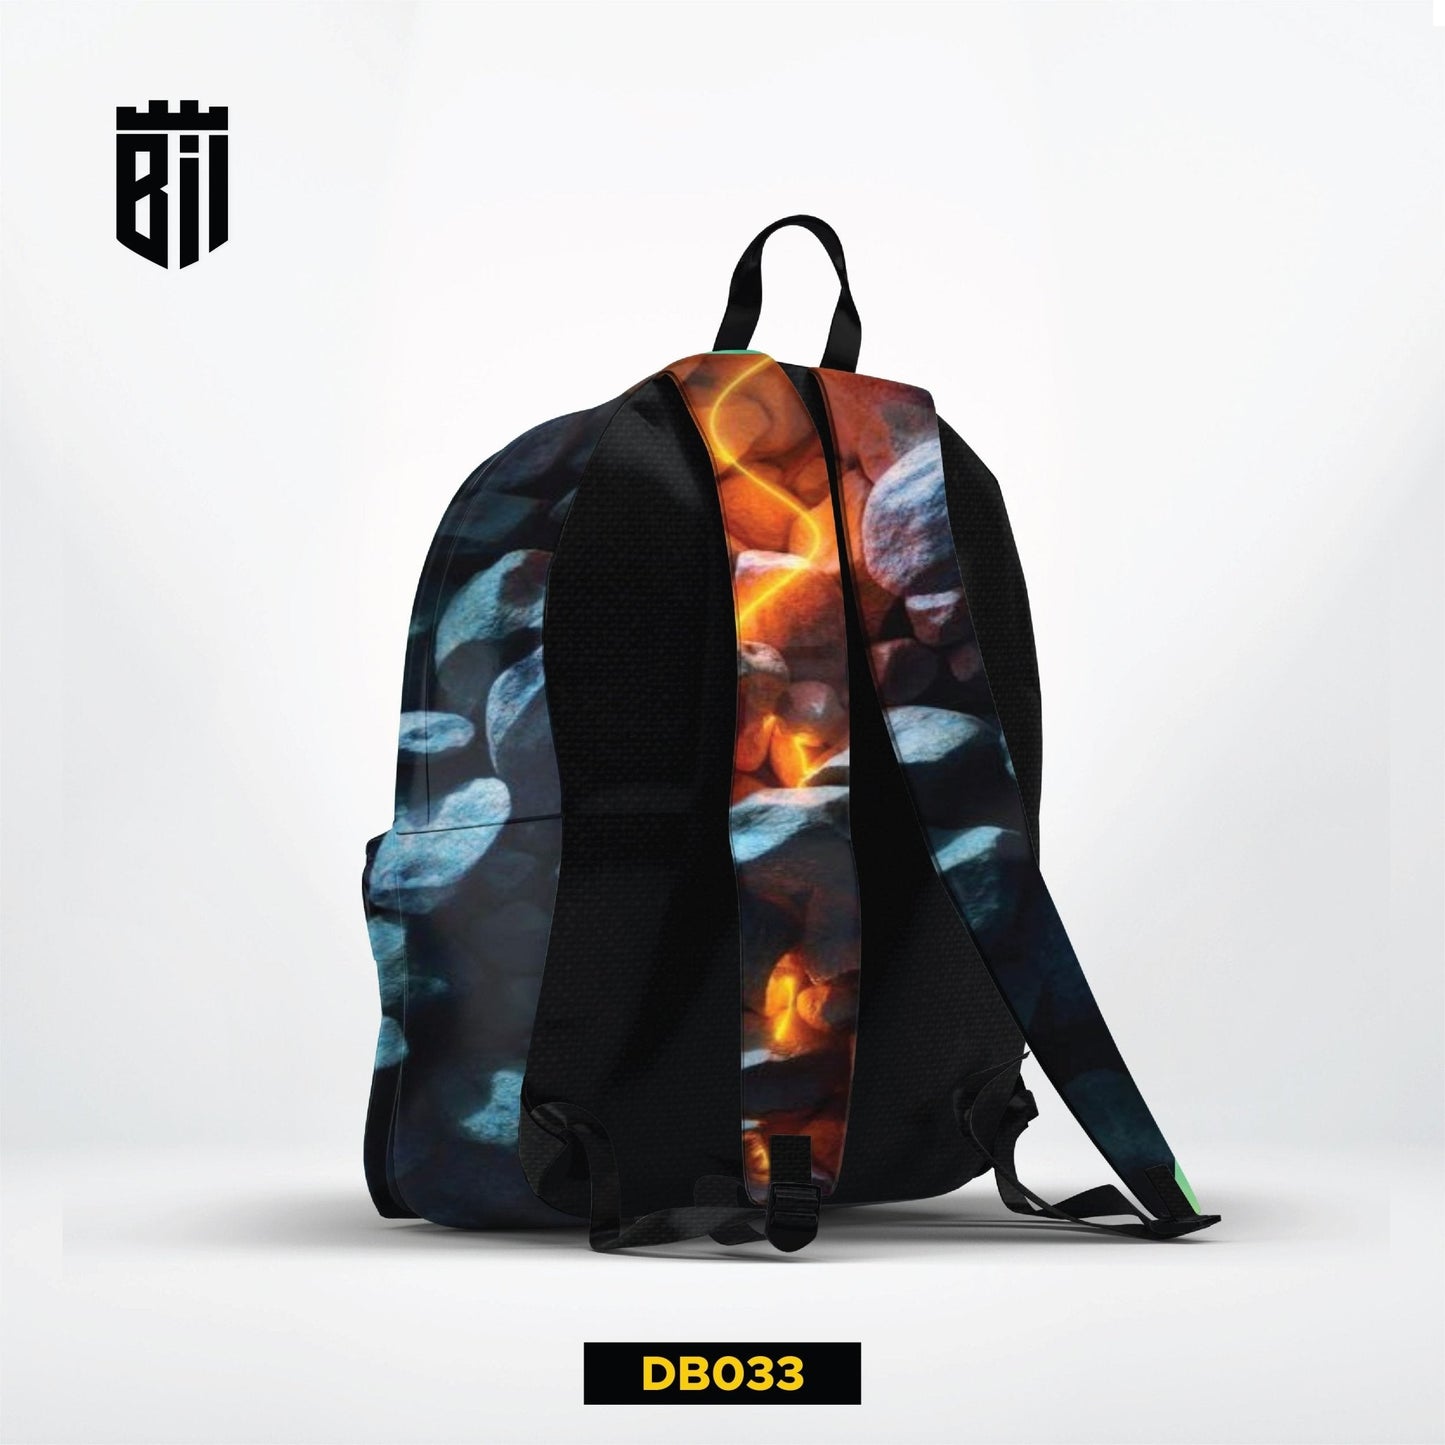 DB033 Neon Stones Allover Printed Backpack - BREACHIT